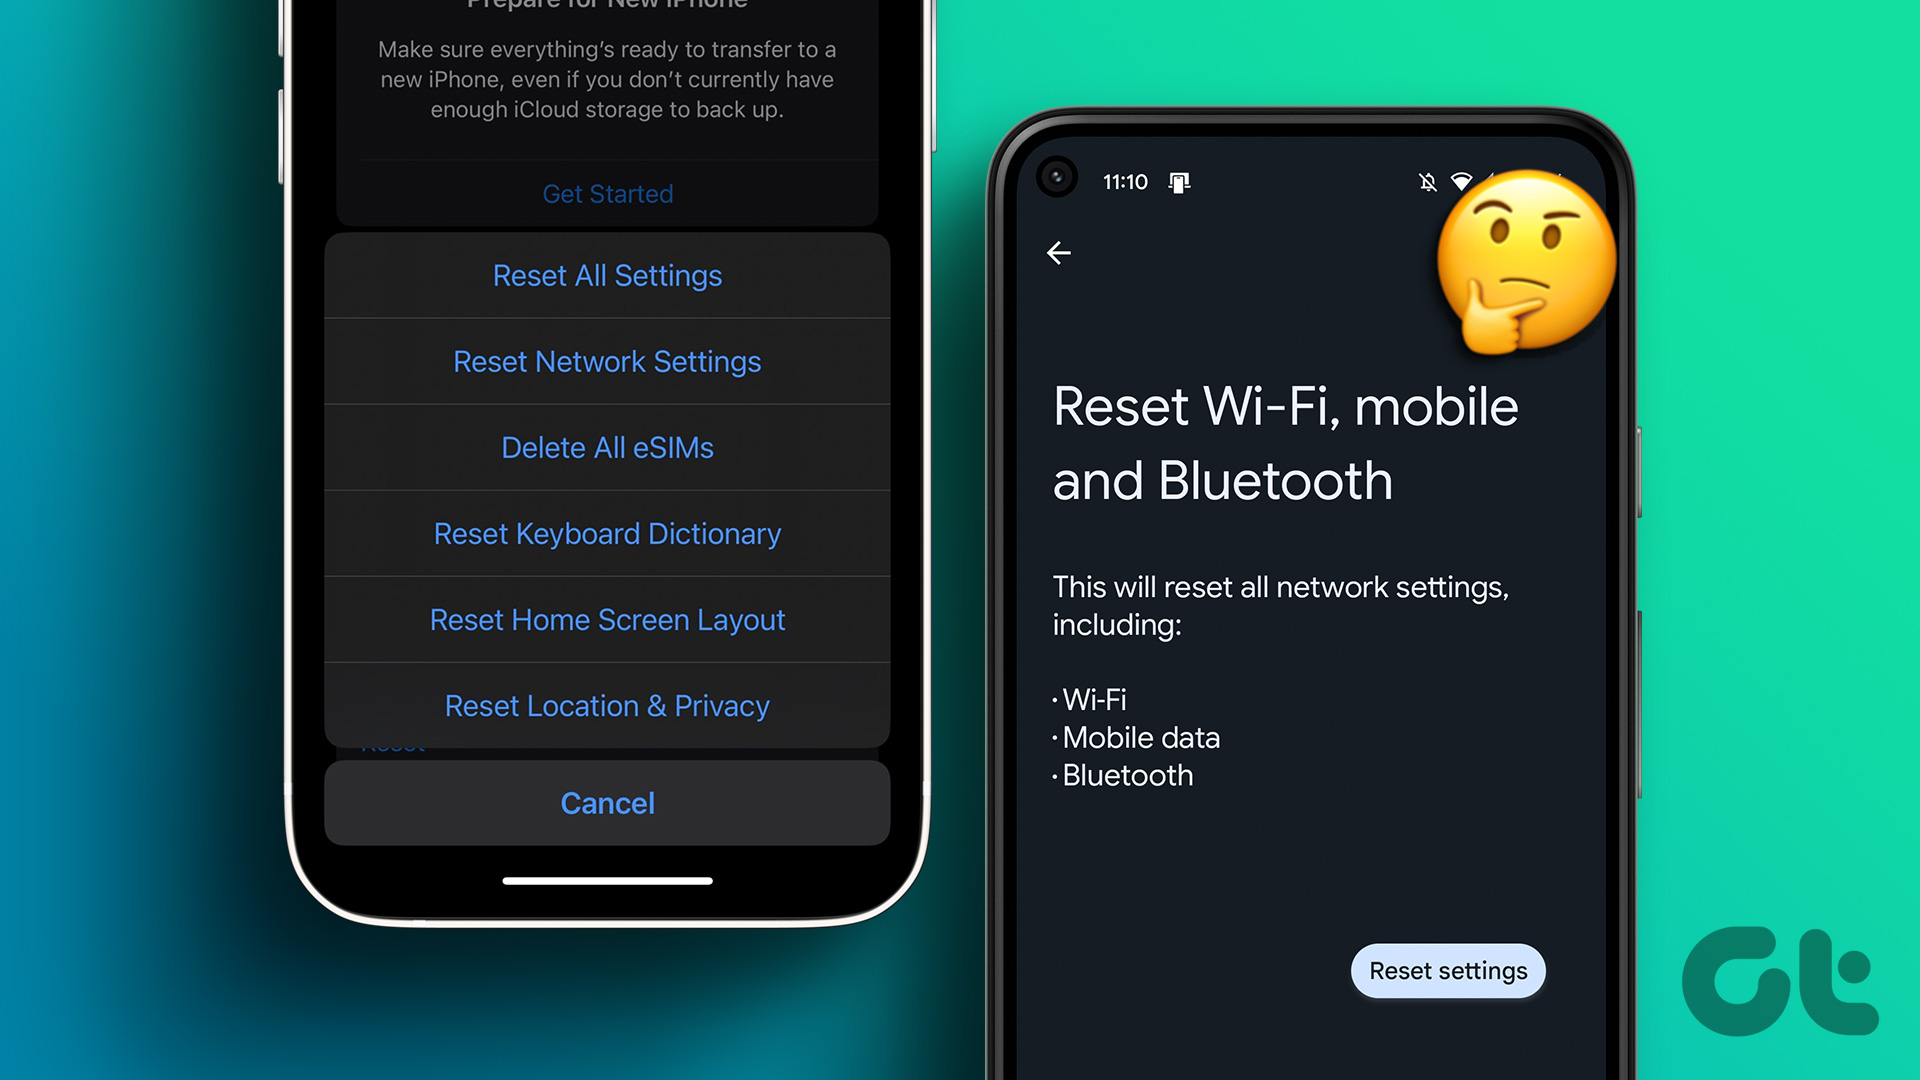 What Happens when you reset network settings android and iPhone